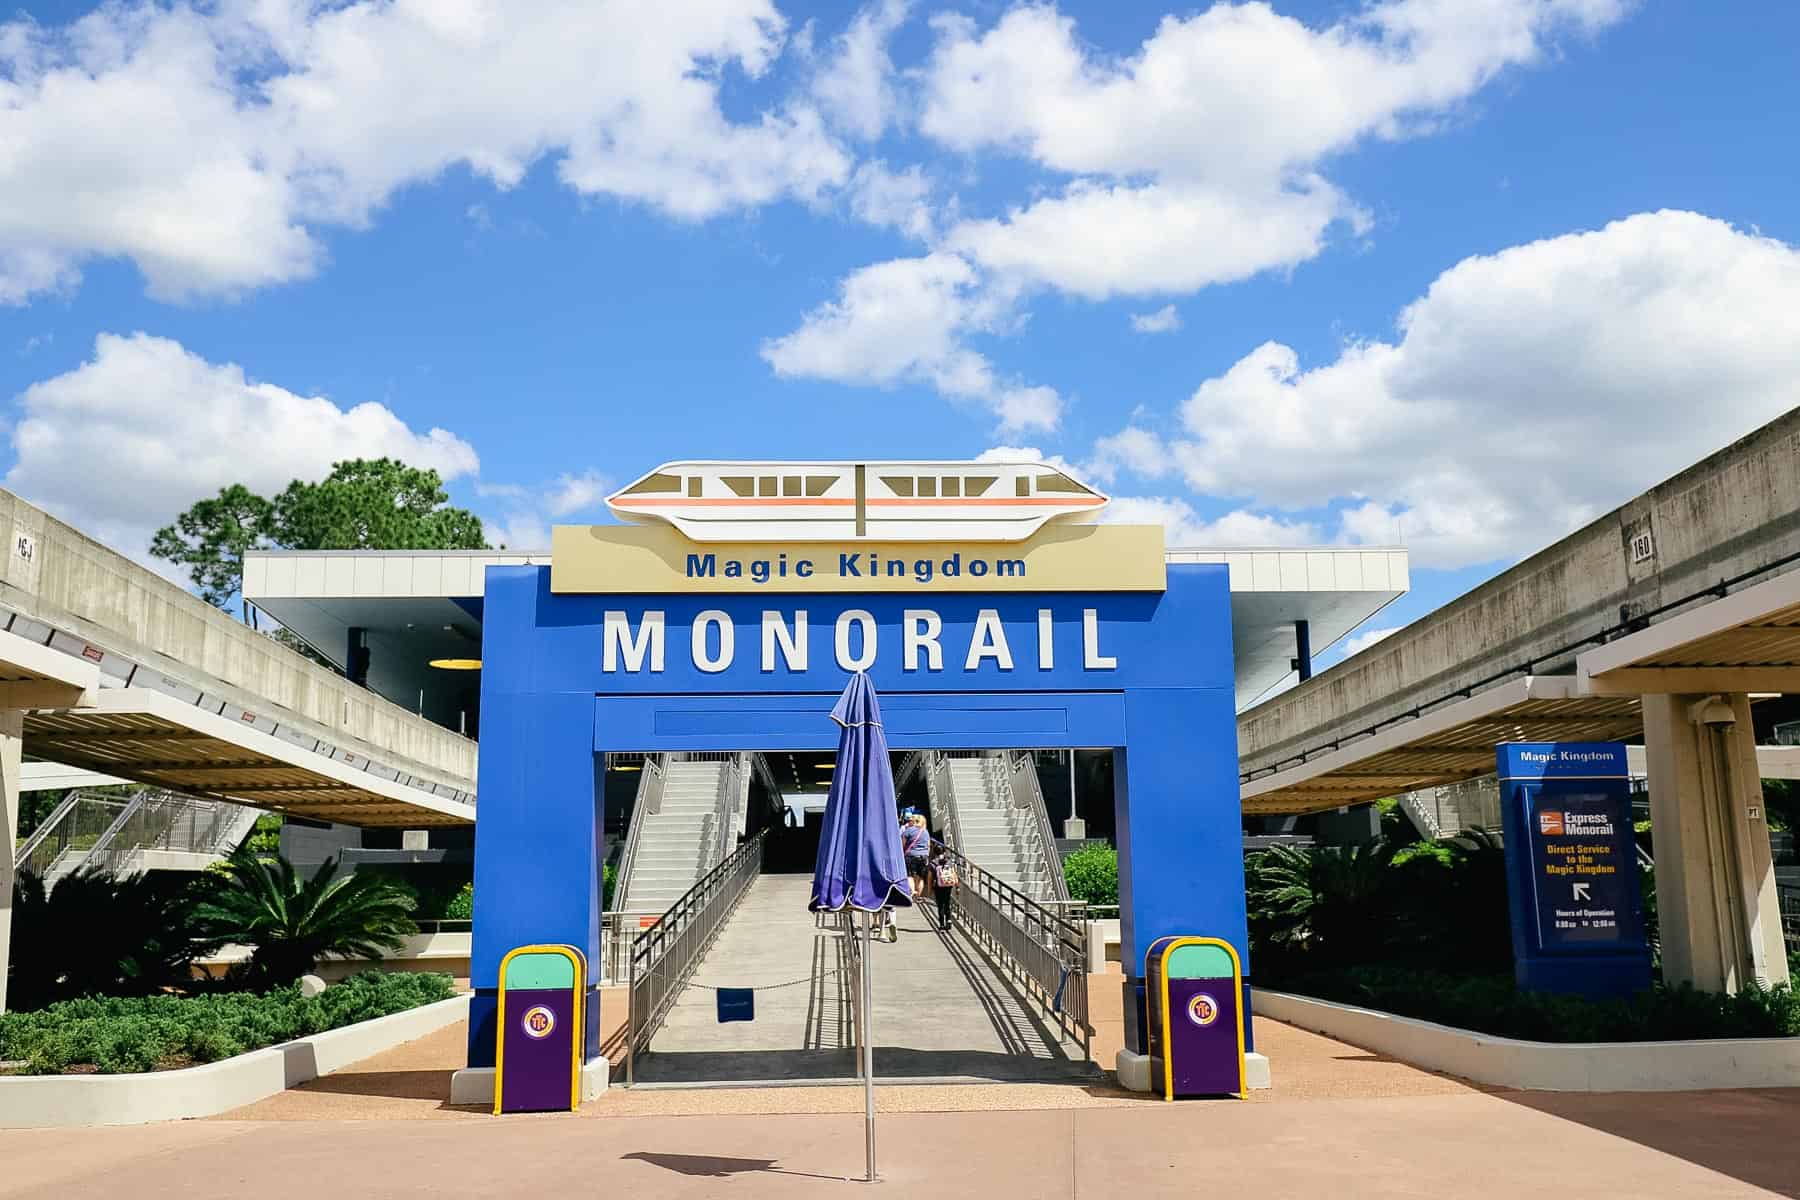 The entrance at the Transportation and Ticket Center to the Magic Kingdom monorail. 